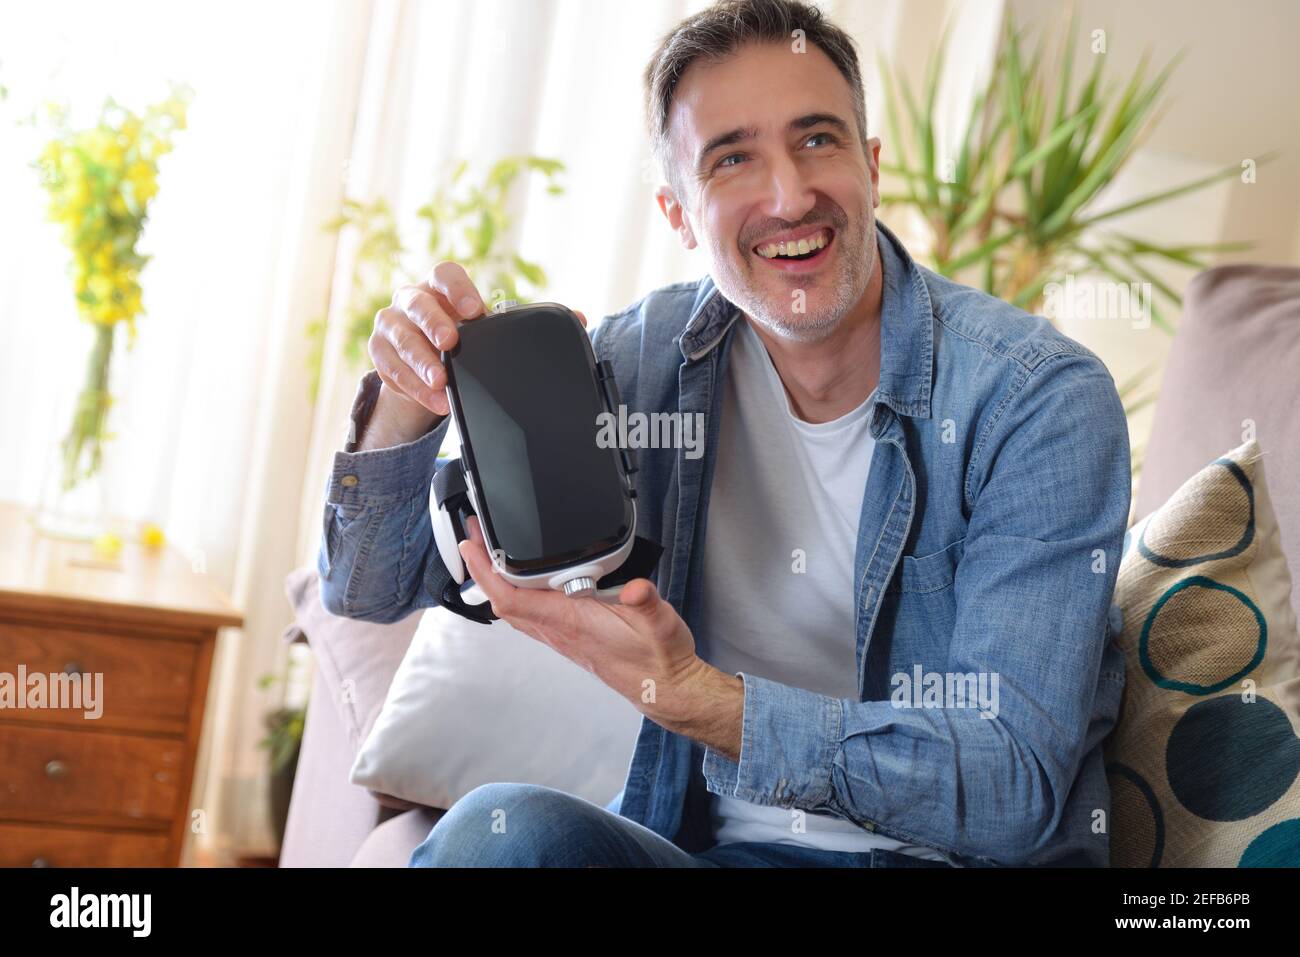 Smiling man showing virtual reality glasses sitting on a sofa in the living room at home Stock Photo